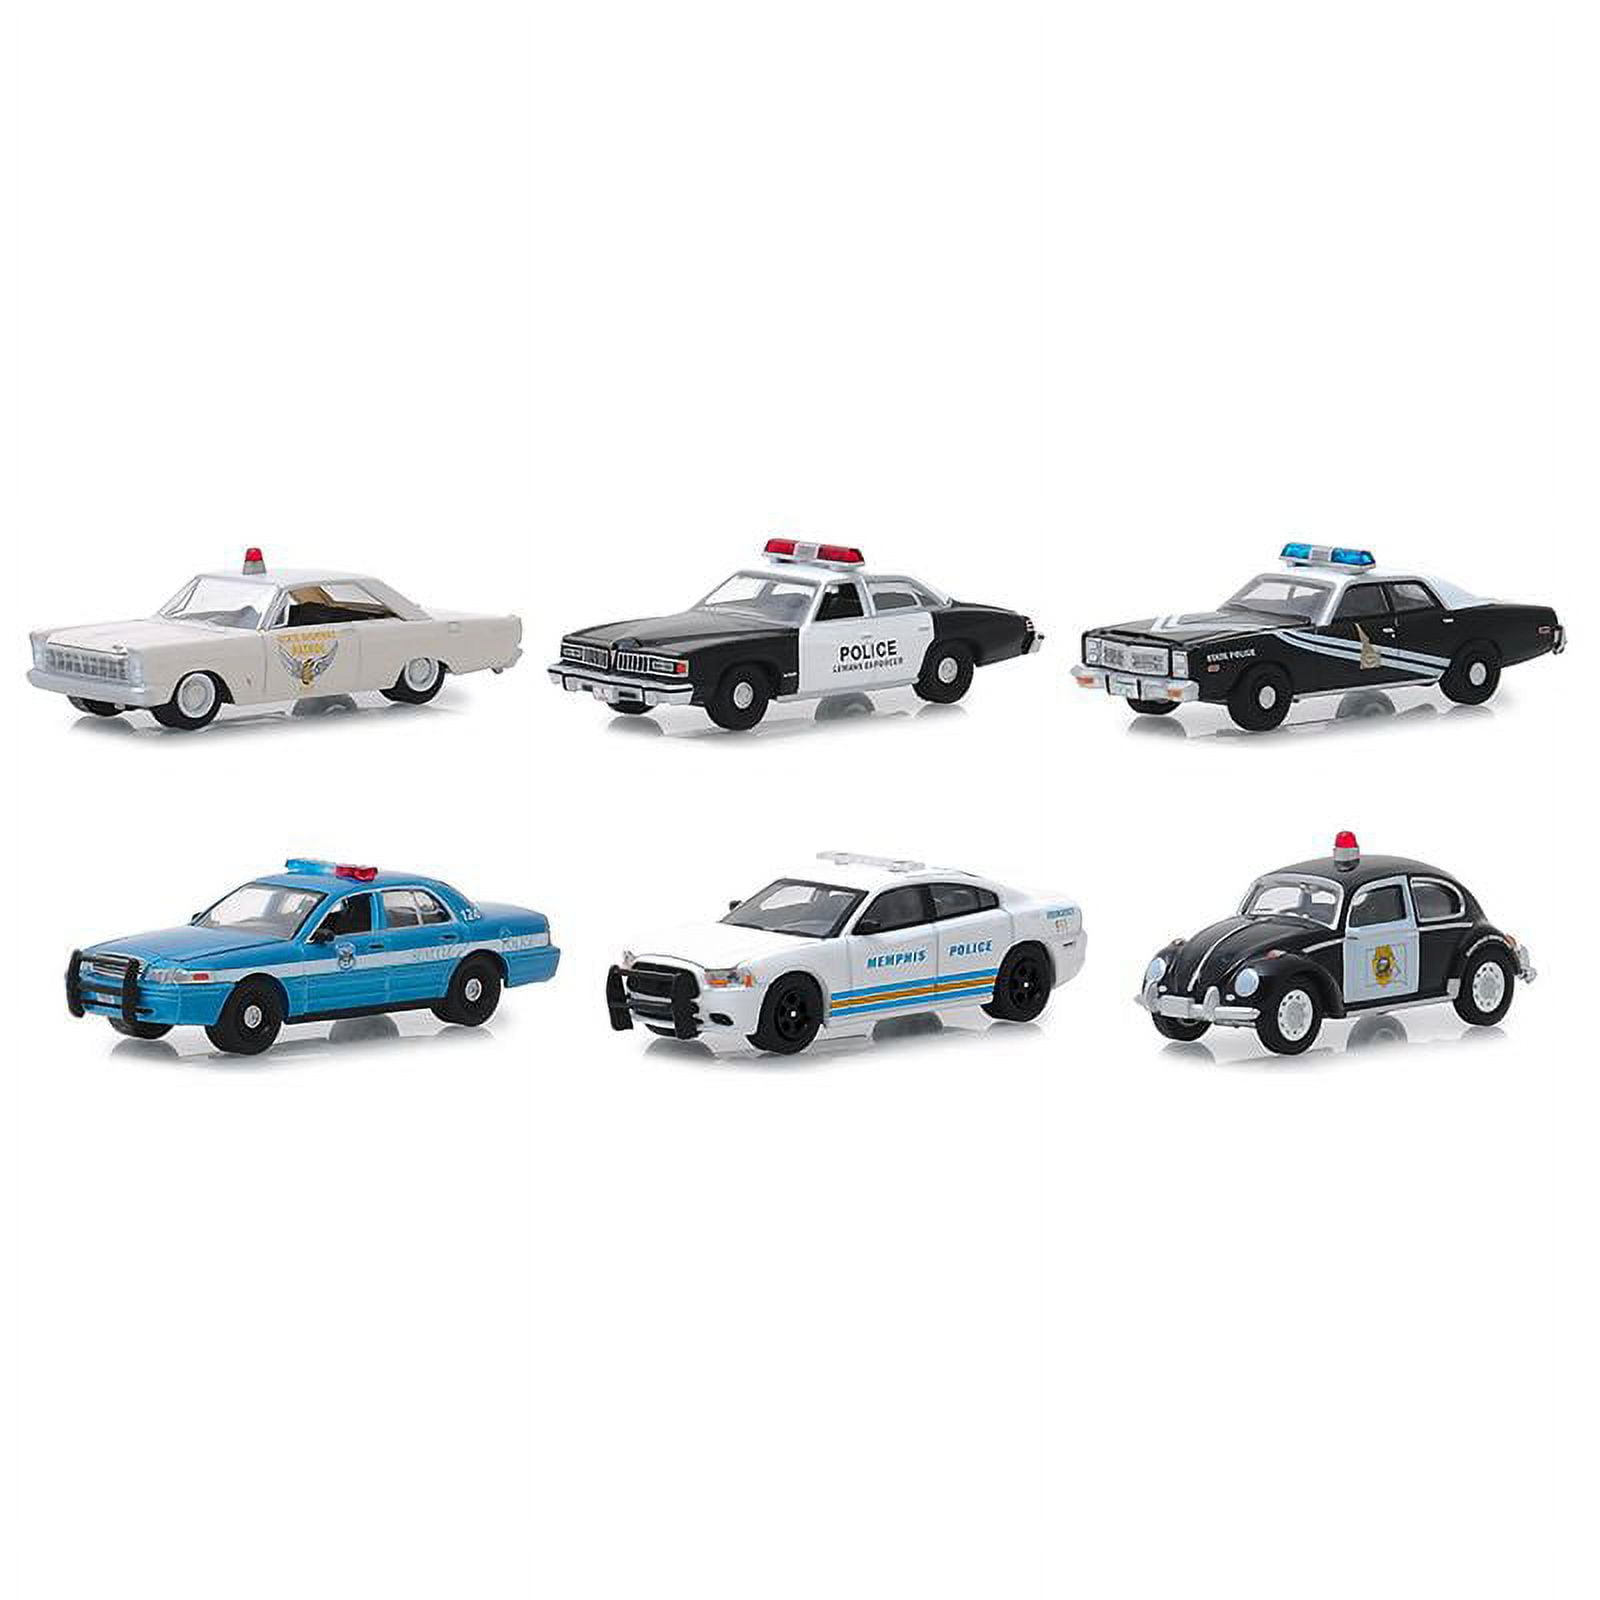 GreenLight 1:64 Hot Pursuit Series 37 alloy model Car Diecast Metal Toys  Birthday Gift For Kids Boy